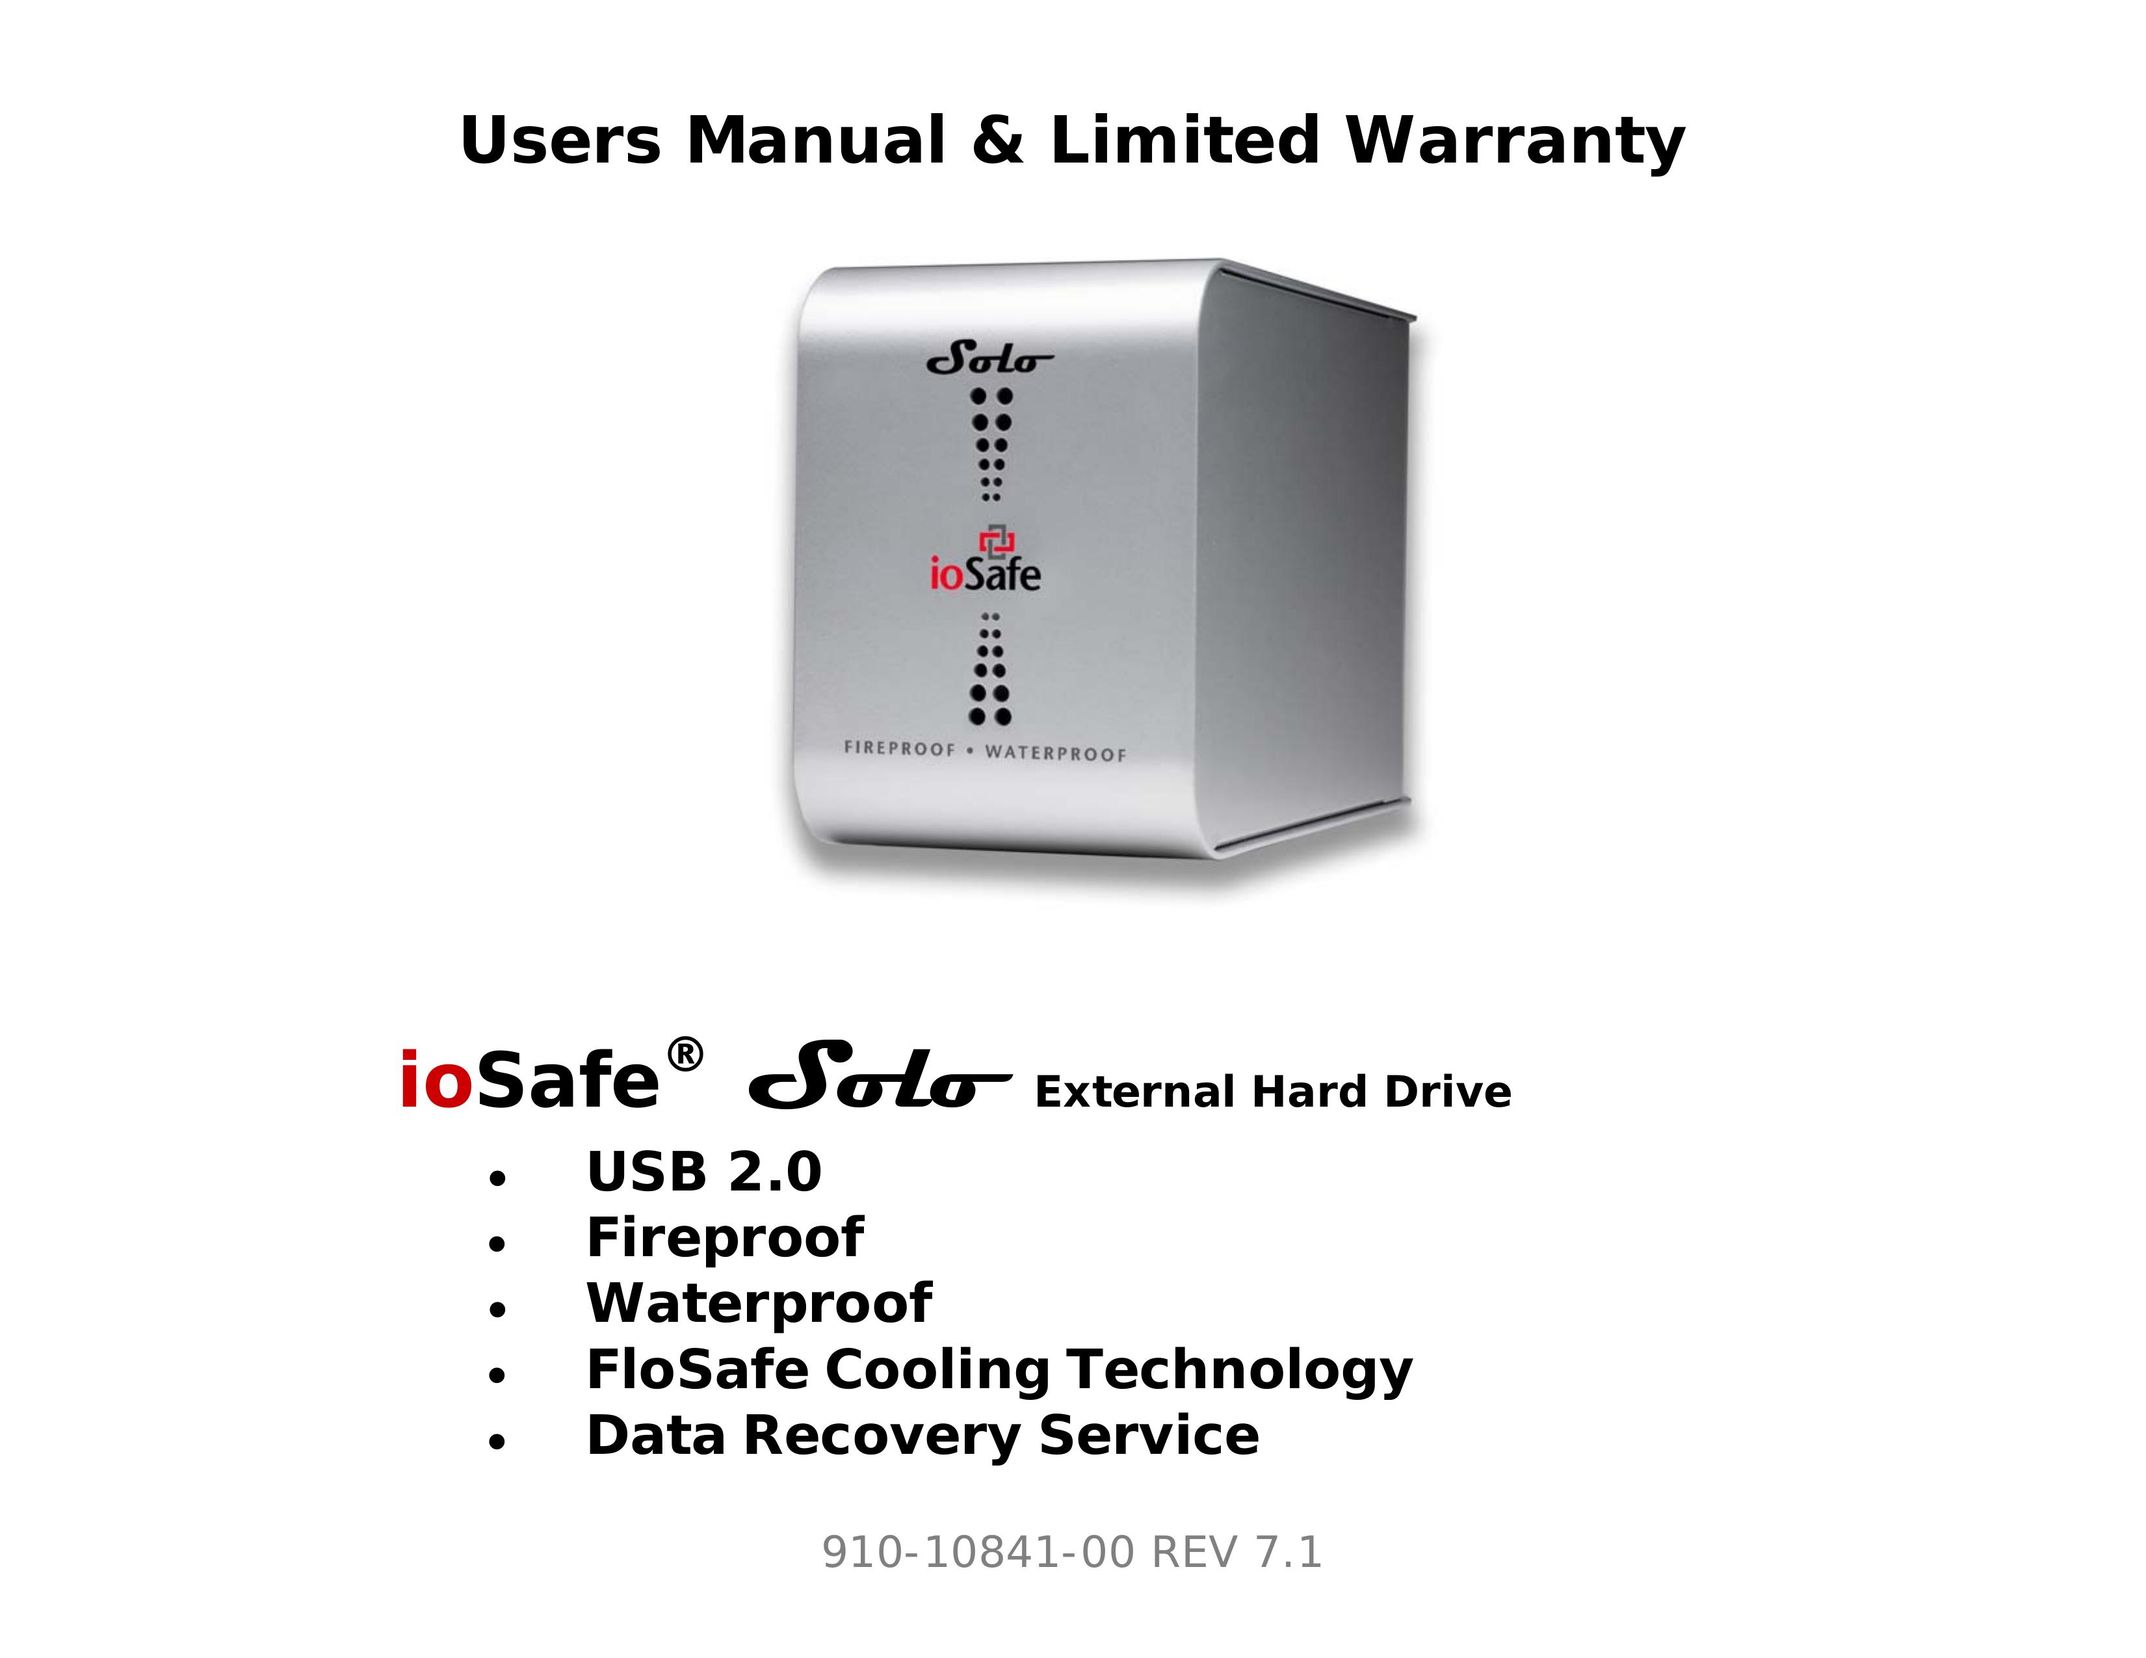 ioSafe Solo Computer Drive User Manual (Page 1)